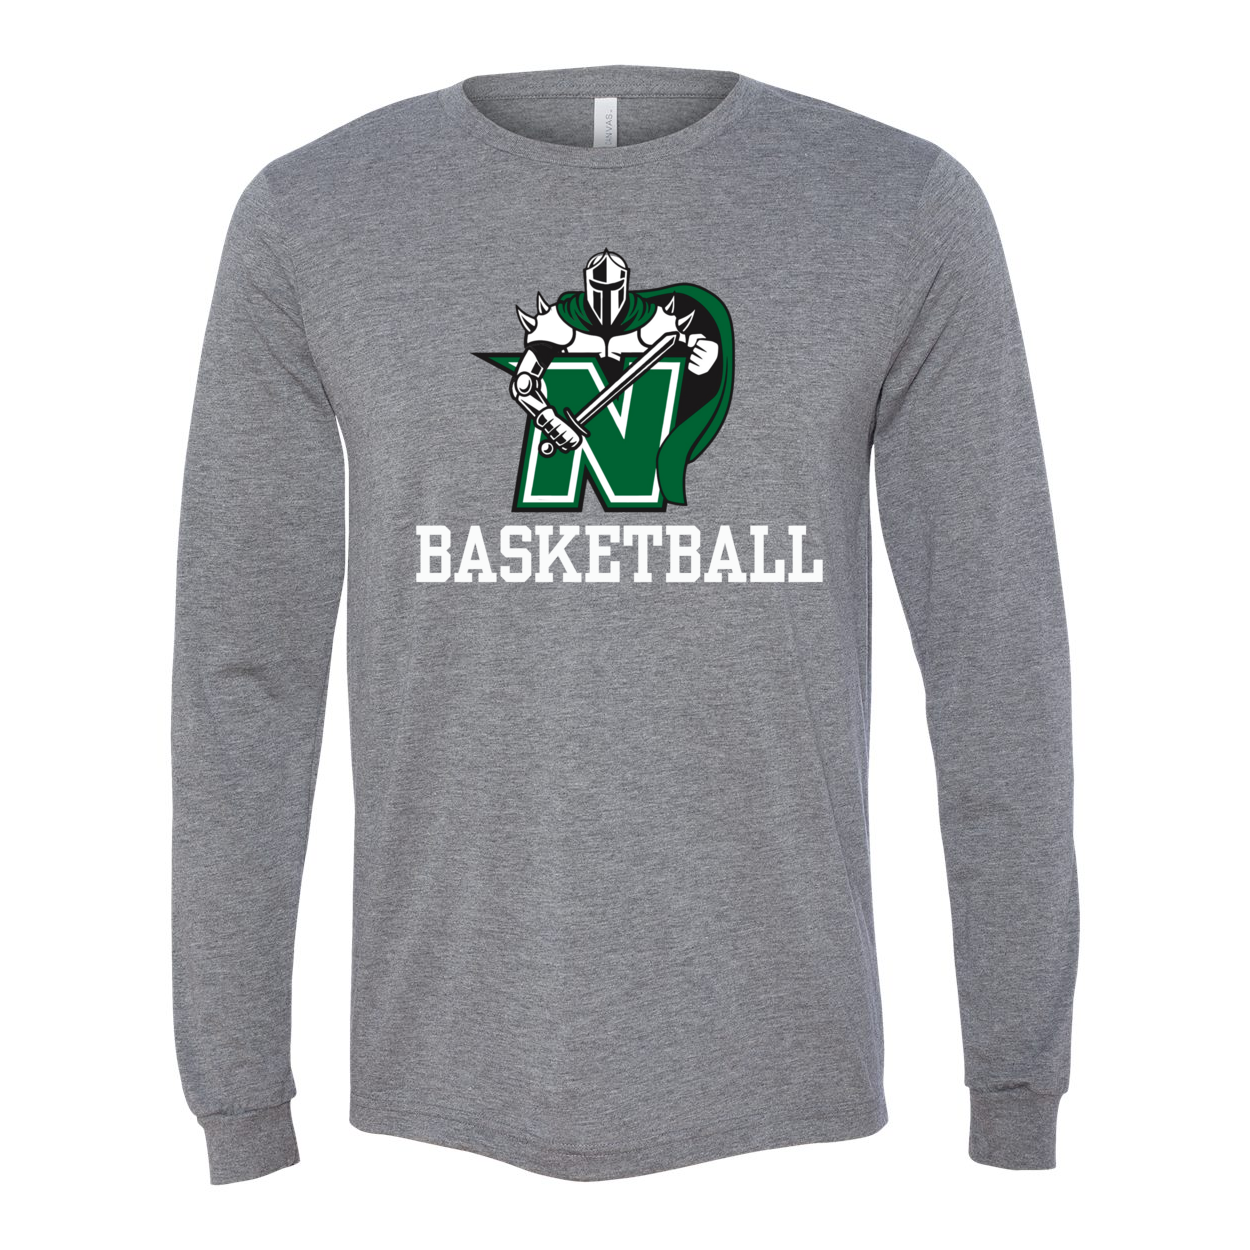 Adult Unisex Super Soft Basketball Classic Logo Long Sleeve Graphic Tee - Nordonia Knights